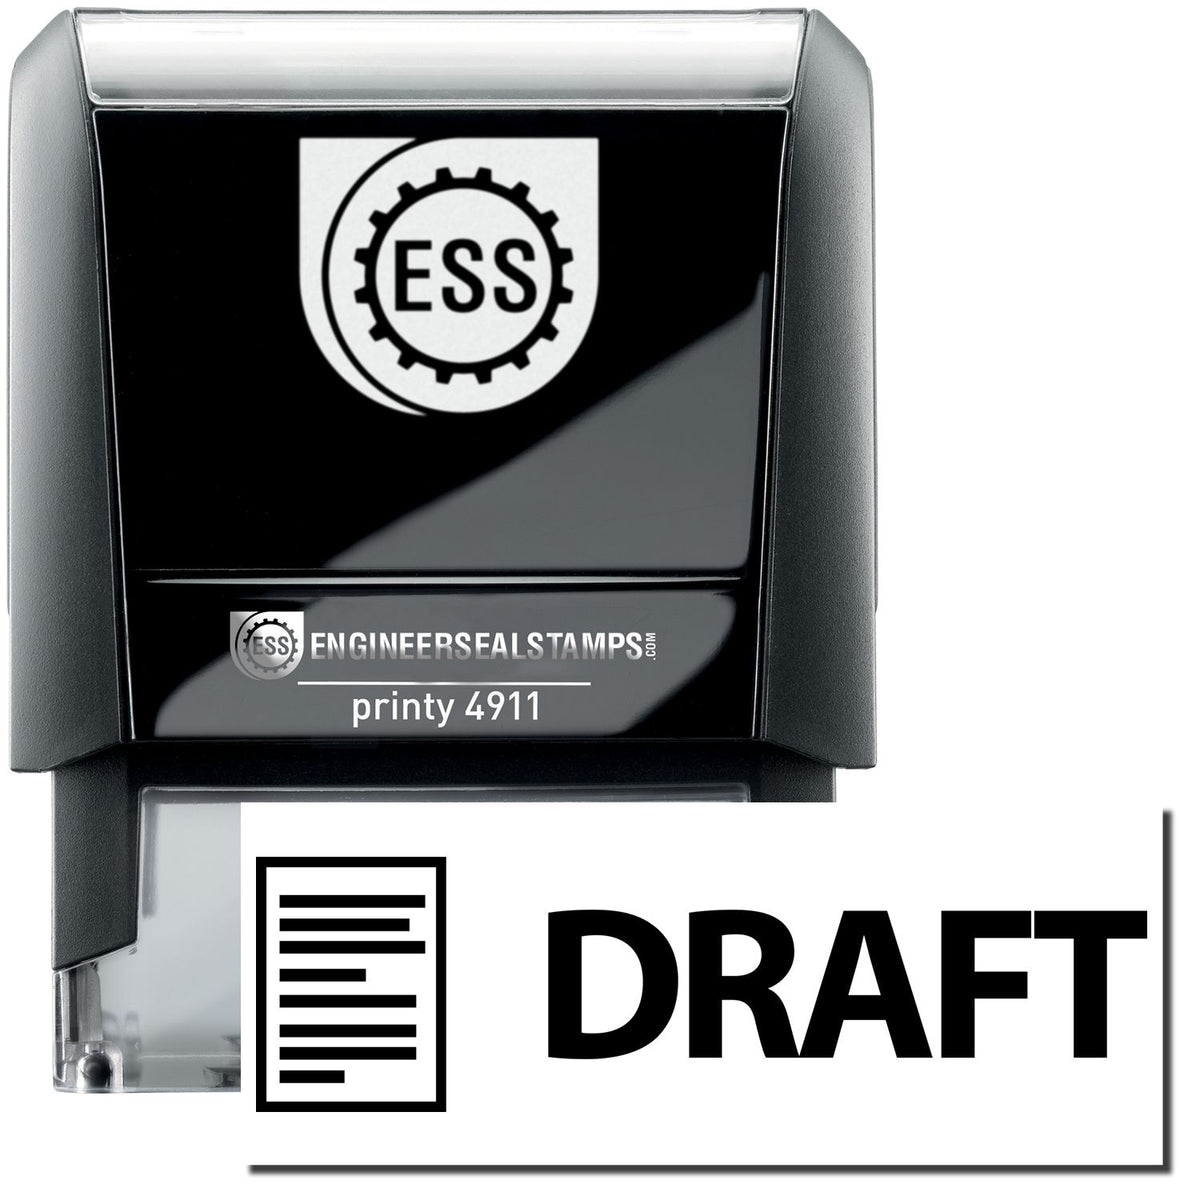 A self-inking stamp with a stamped image showing how the text &quot;DRAFT&quot; in an eye-catching font and an image of a letter on the left is displayed after stamping.